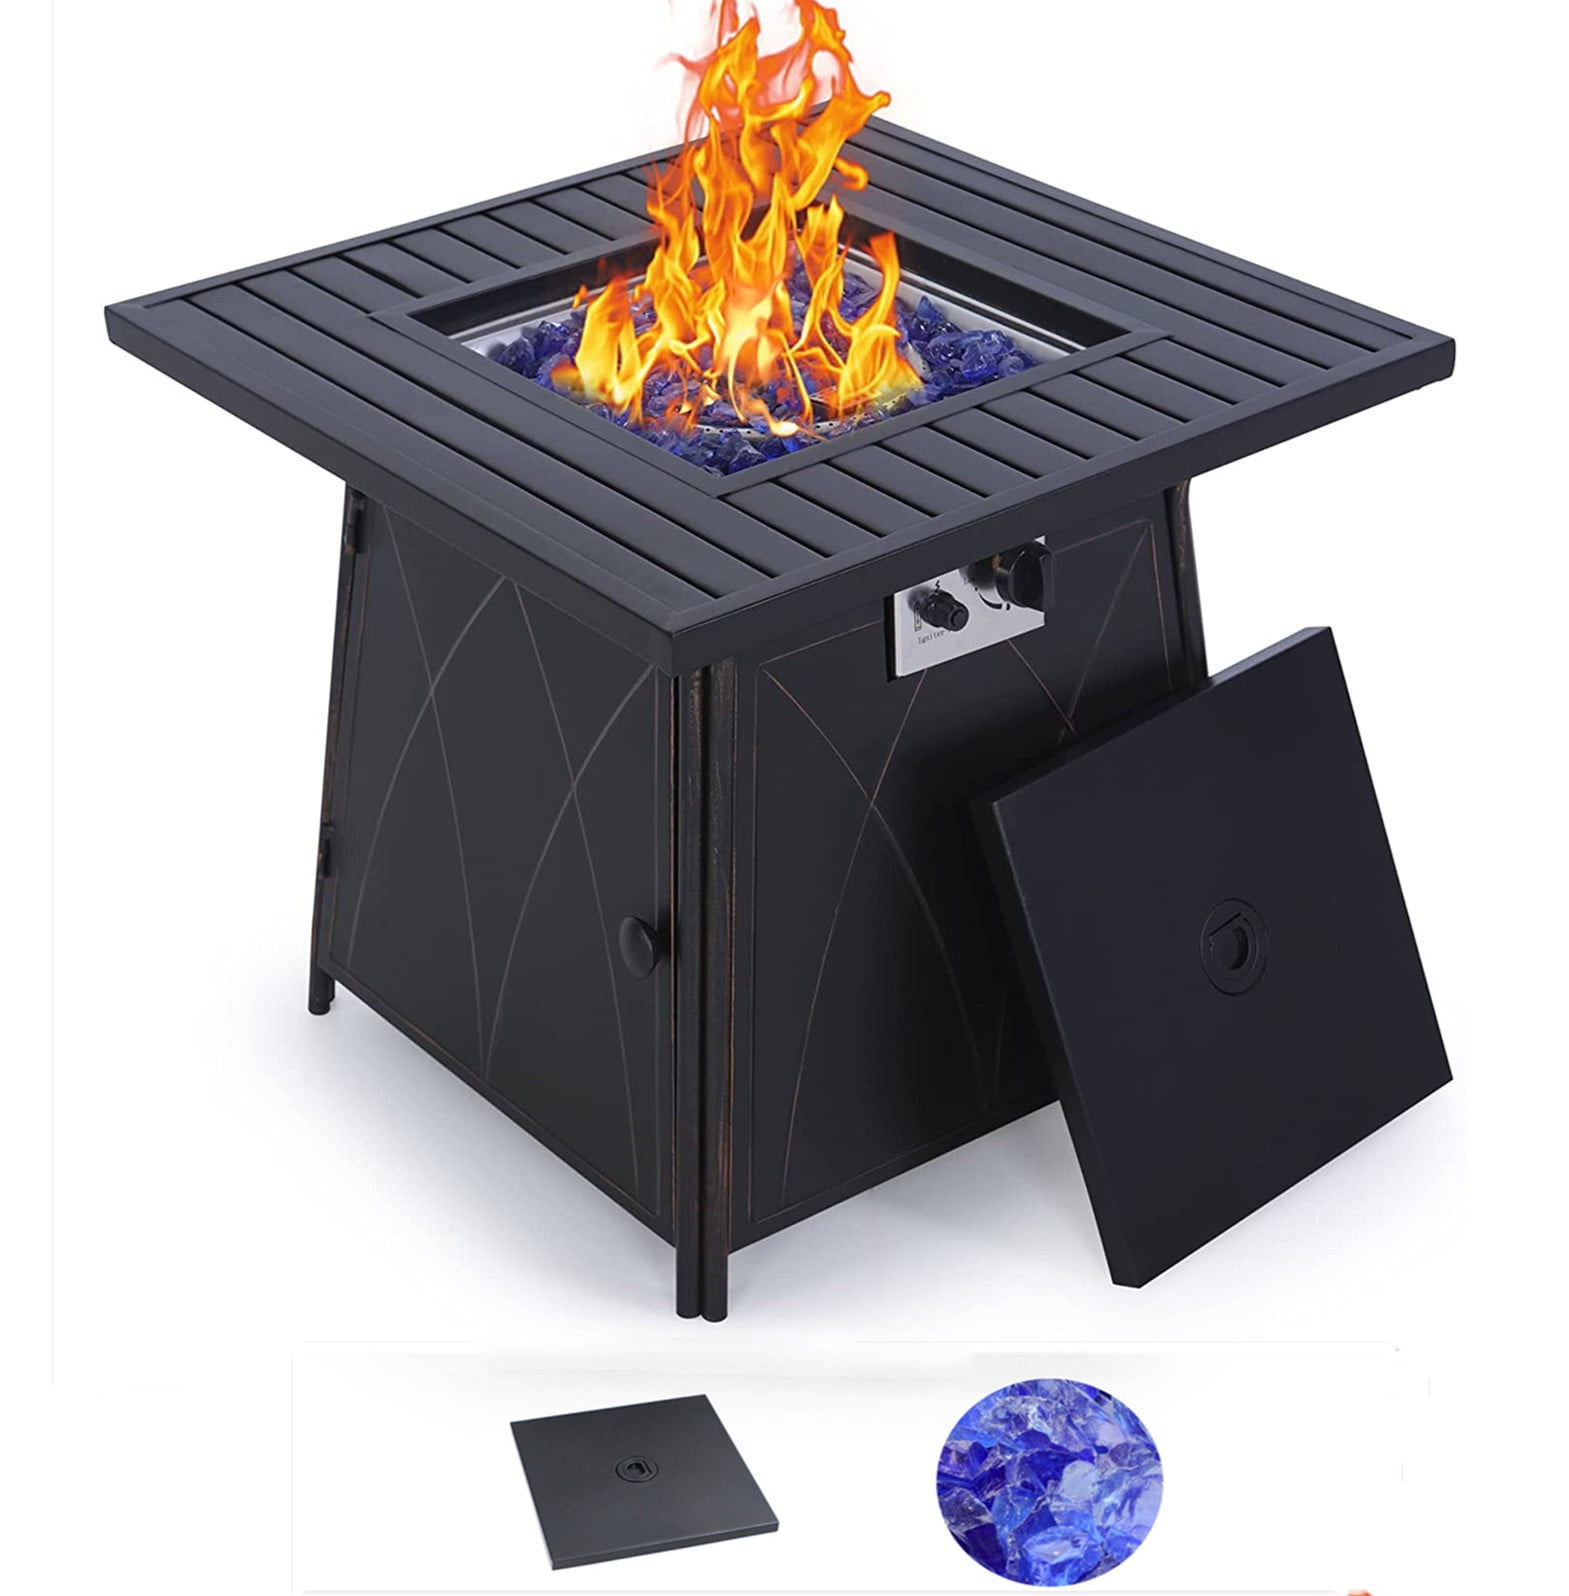 Mf Studio Gas Fire Pit Table 28 Inch, Square Metal Fire Pit Lid